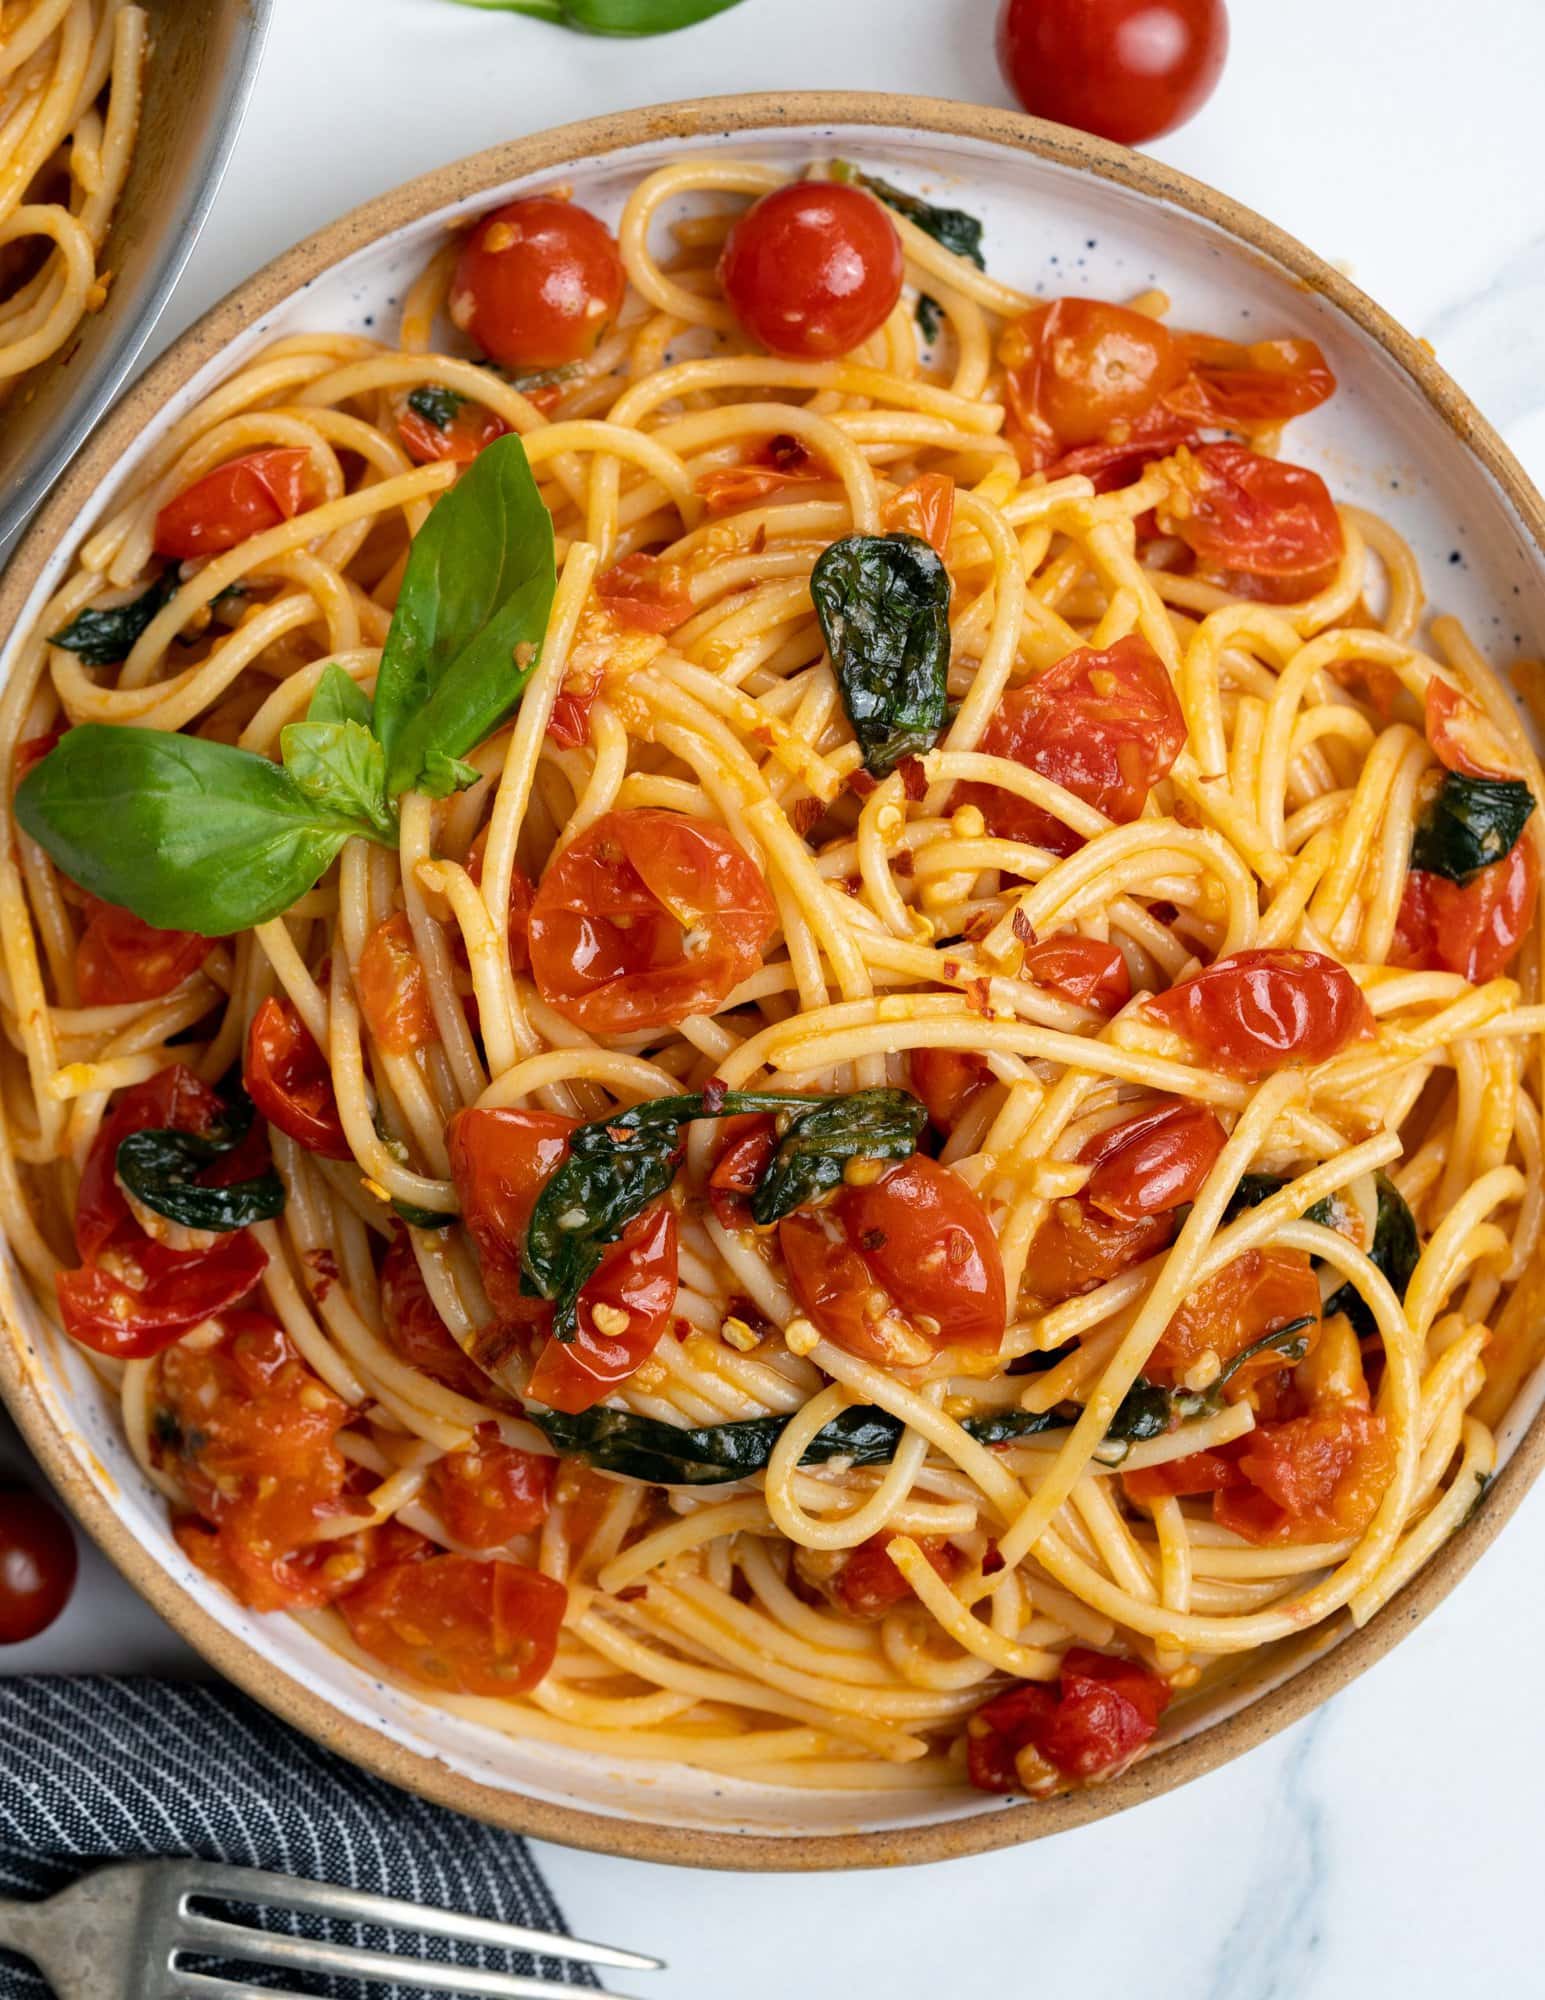 Spaghetti pasta is made with cooked cherry tomatoes, parsley and red pepper flakes and topped with fresh basil